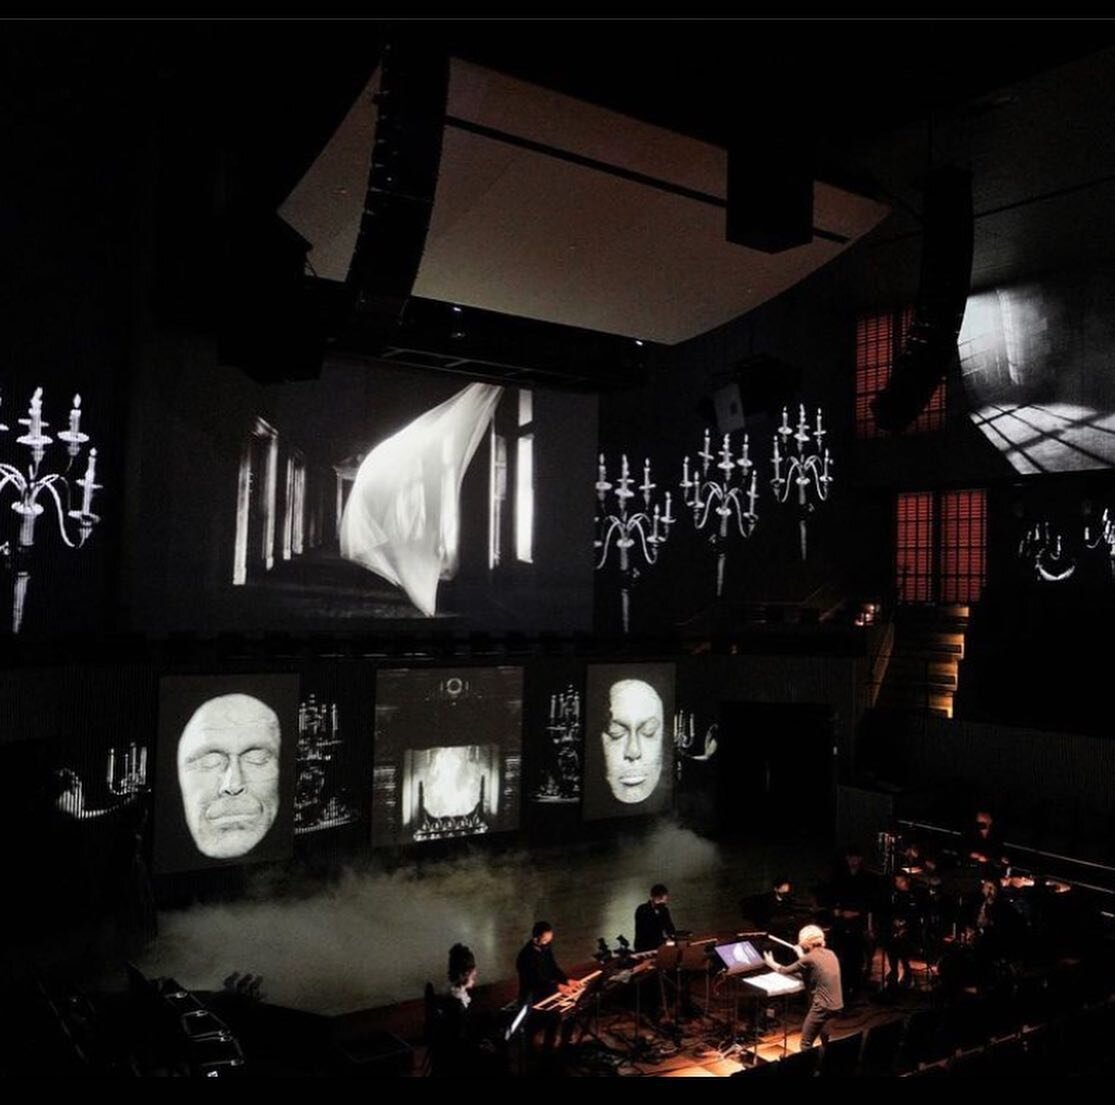 There are still 2 more performances of The @opera_parallele production of La Belle et la
B&ecirc;te (Beauty and the Beast) by Philip Glass based on the film by Jean Cocteau @philipglassmusic @sfjazz tonight at 7:30 and tomorrow at 3:00pm!

#phillipgl